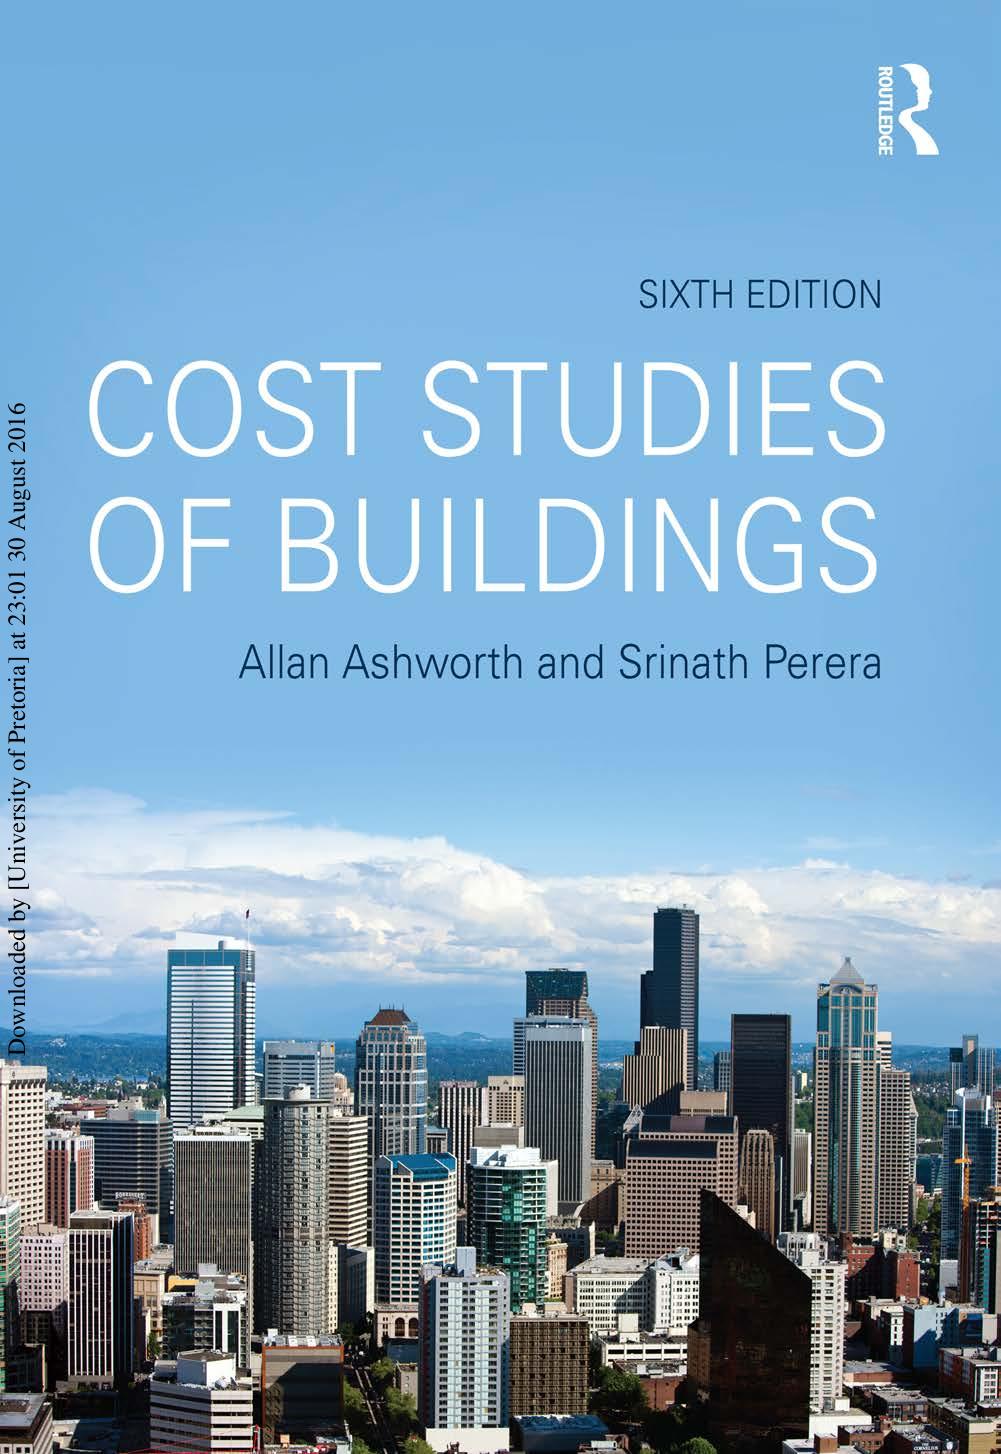 Cost Studies of Buildings by Allan Ashworth and Srinath Perera 2015